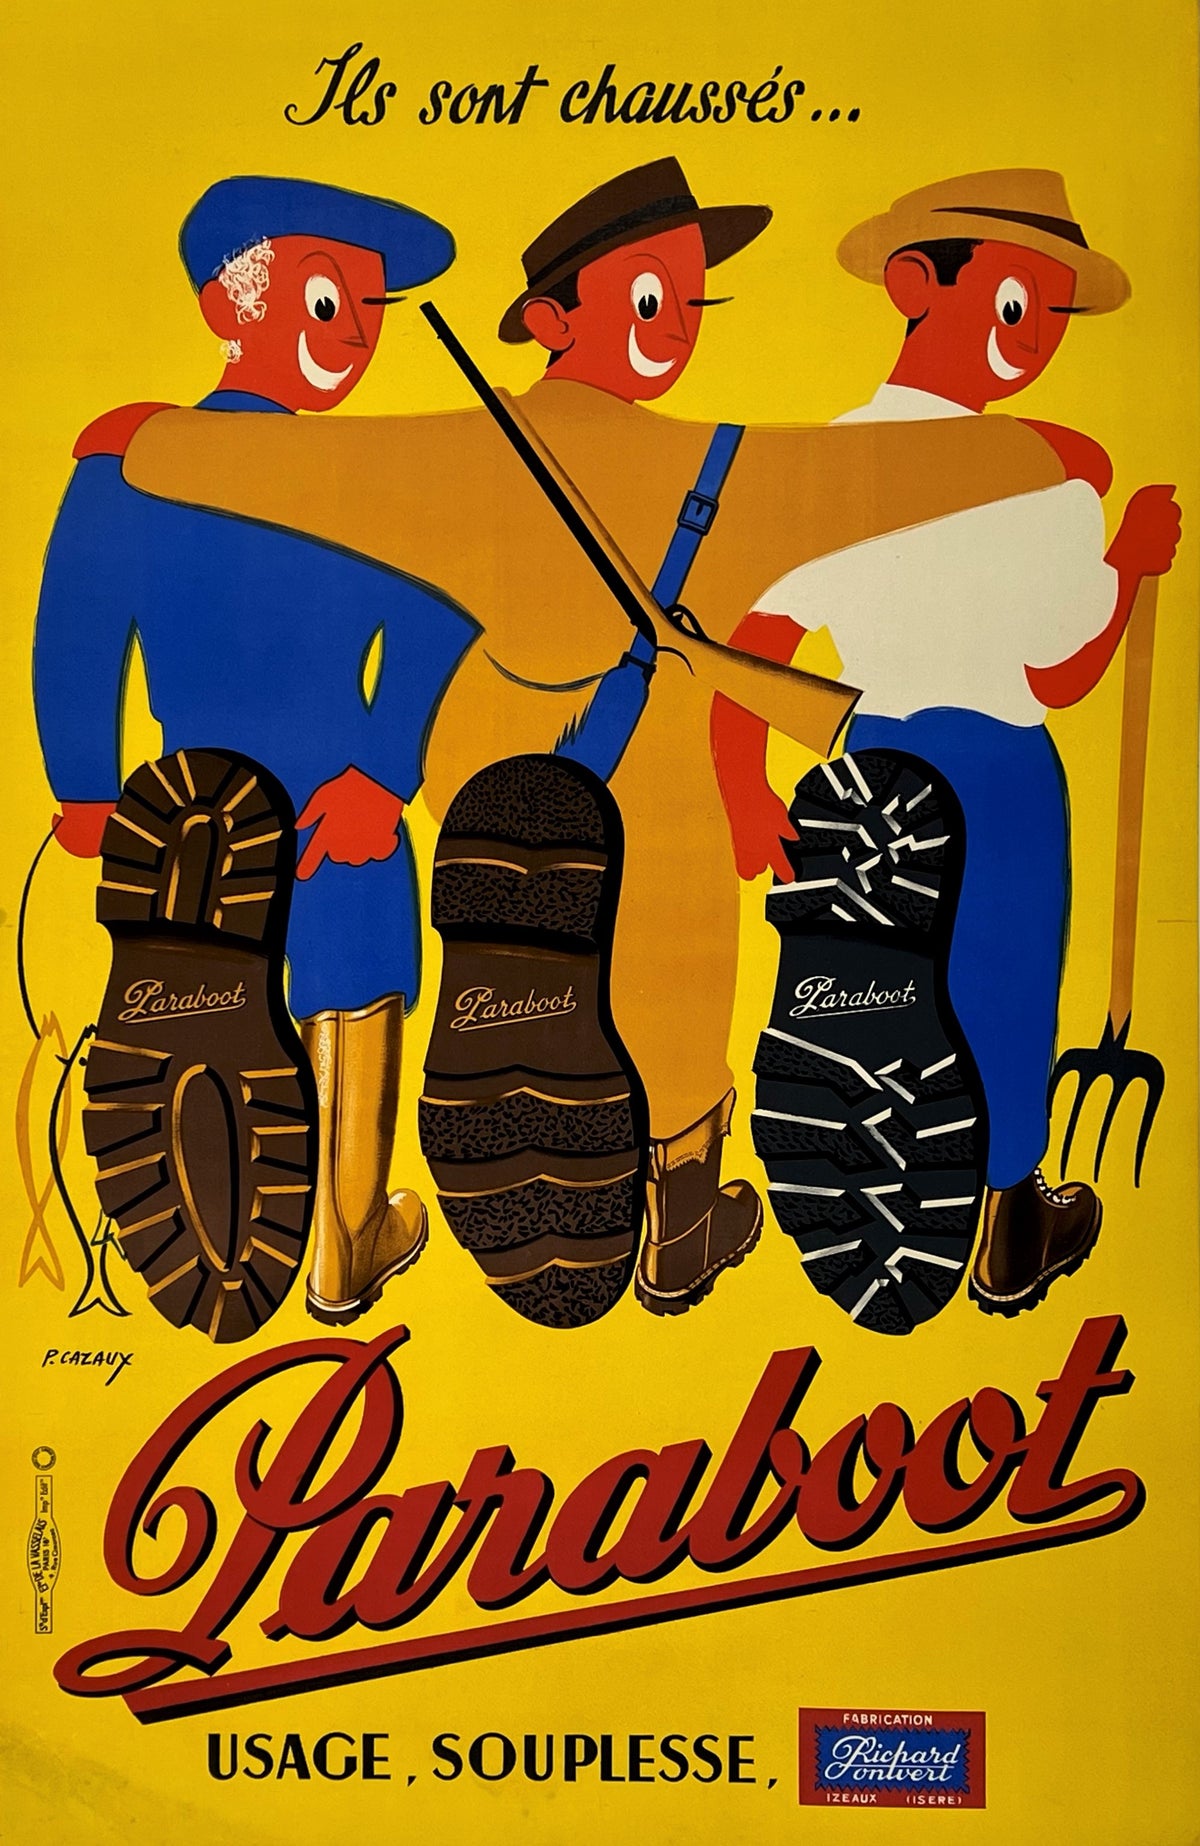 Paraboot Yellow_1 - Authentic Vintage Poster